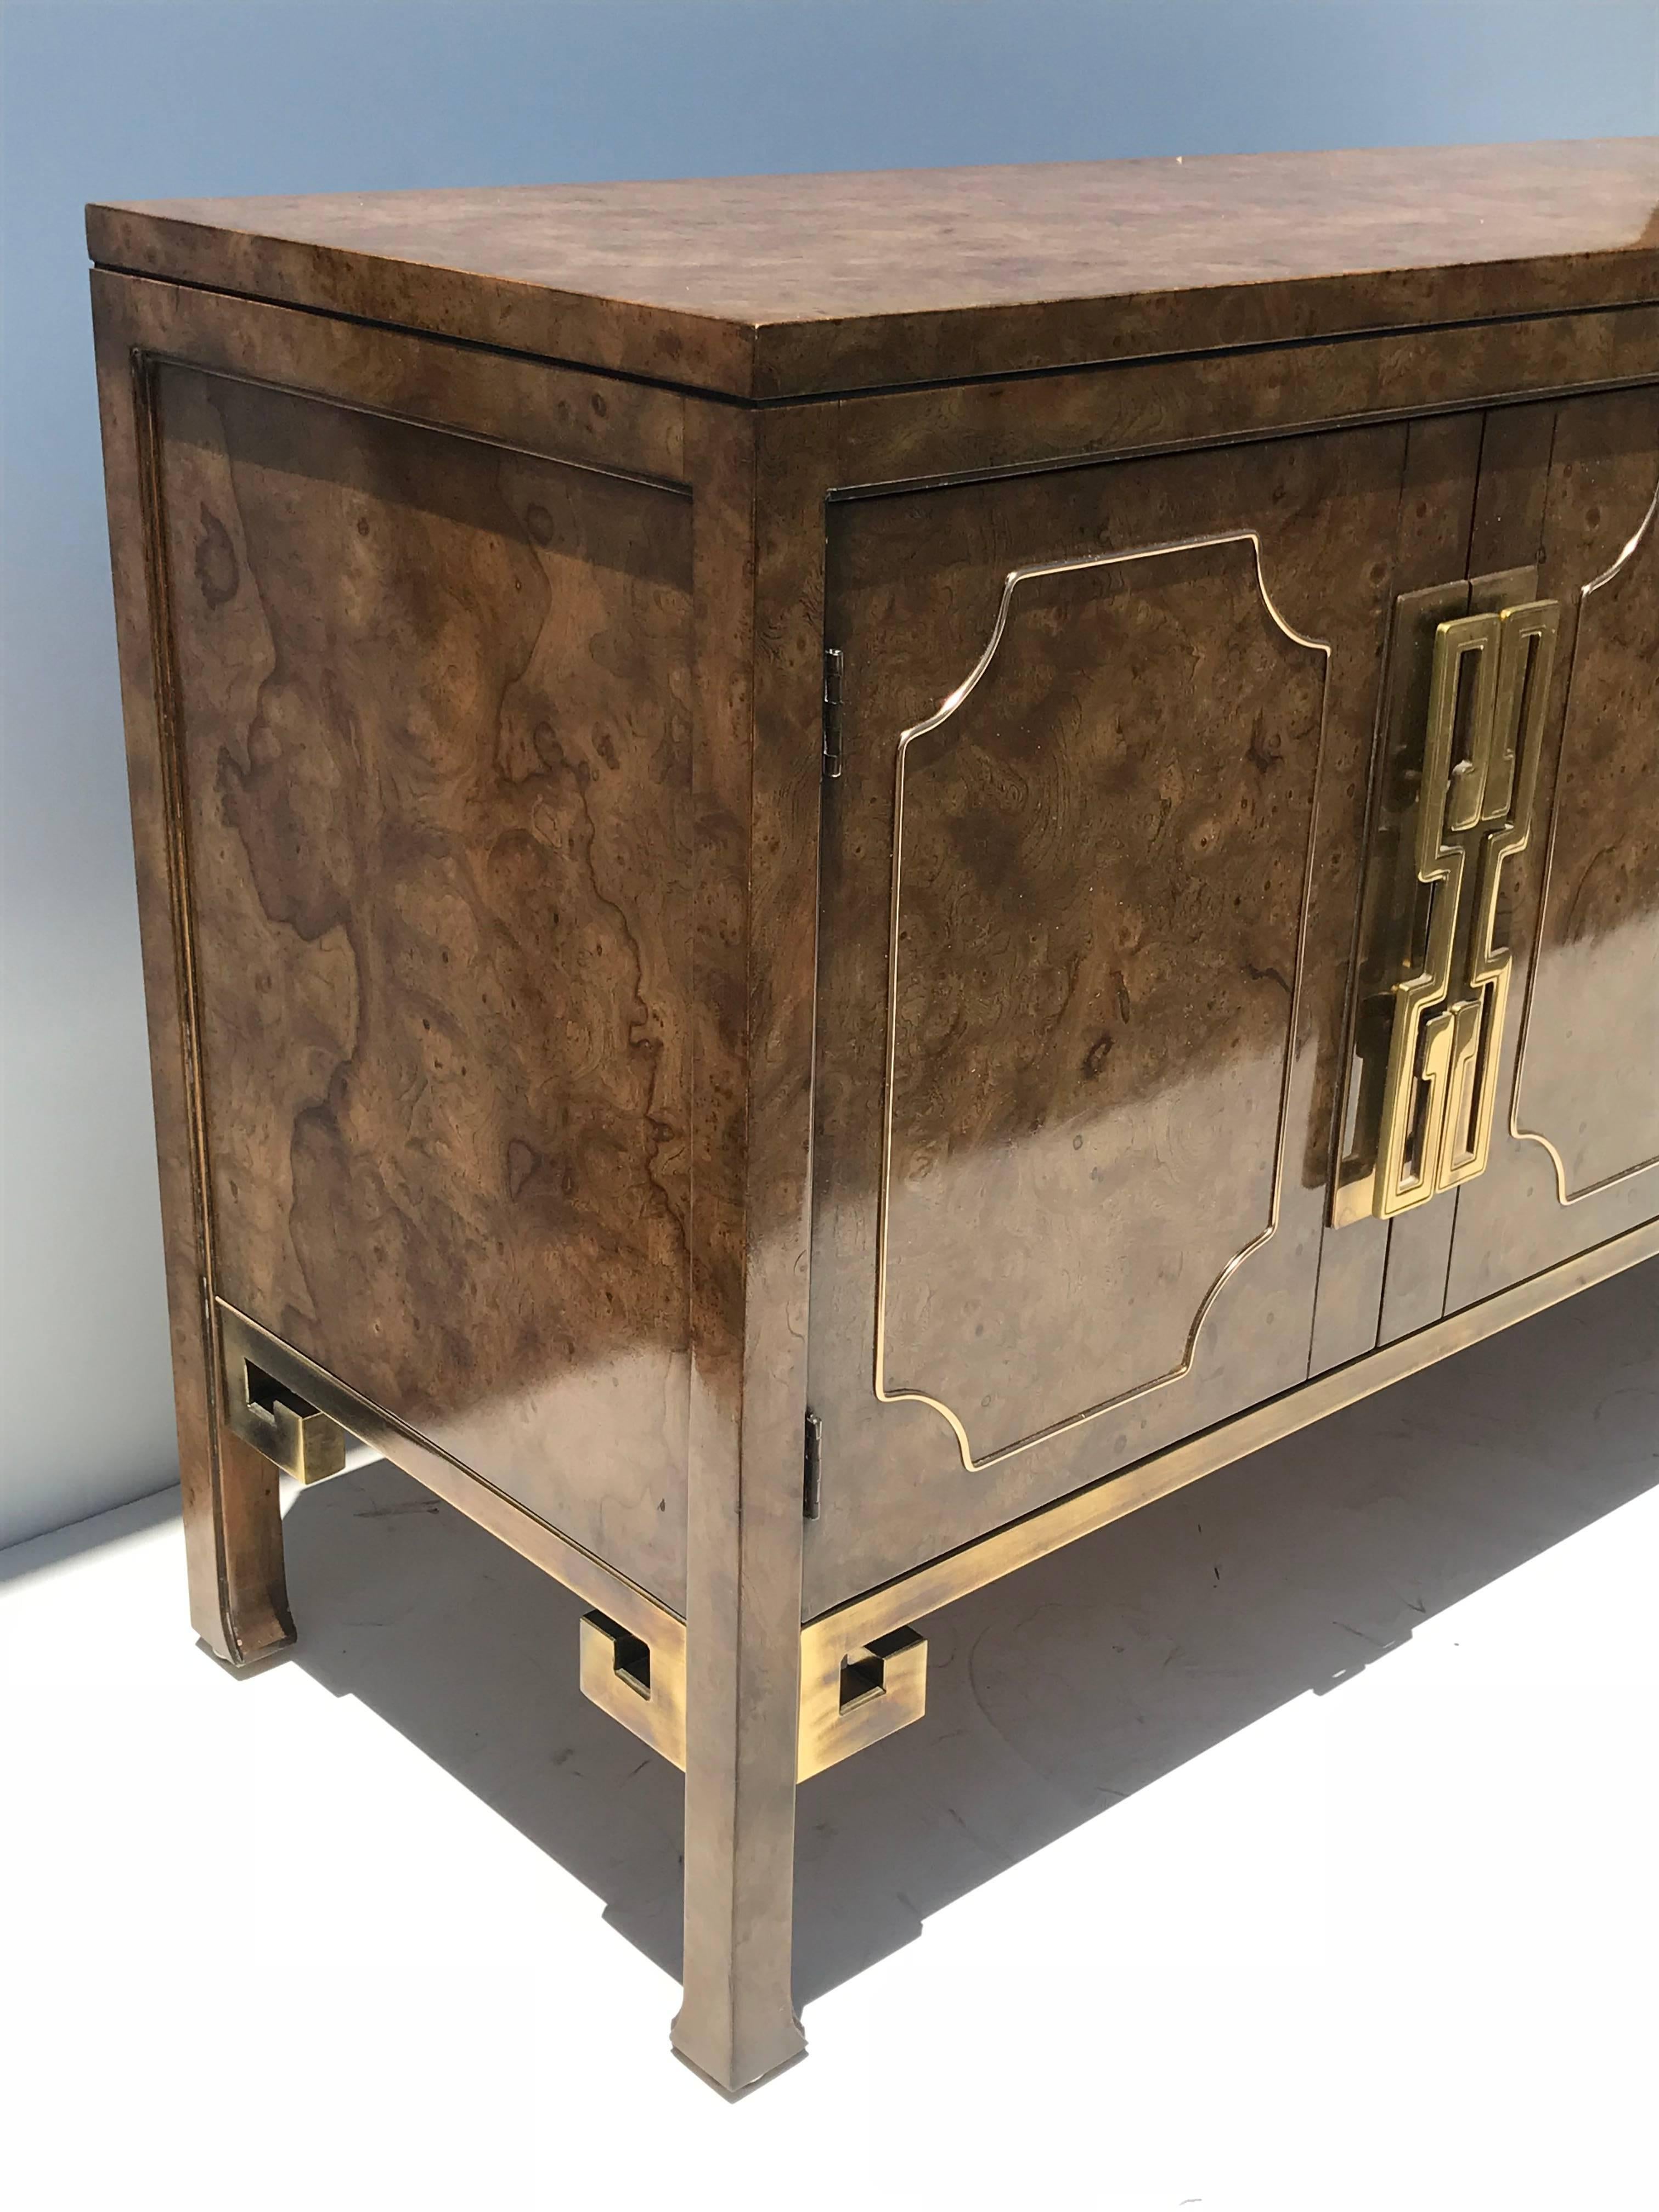 Mastersraft burl credenza sideboard.
Offered at Gallery Girasole in North Hollywood.